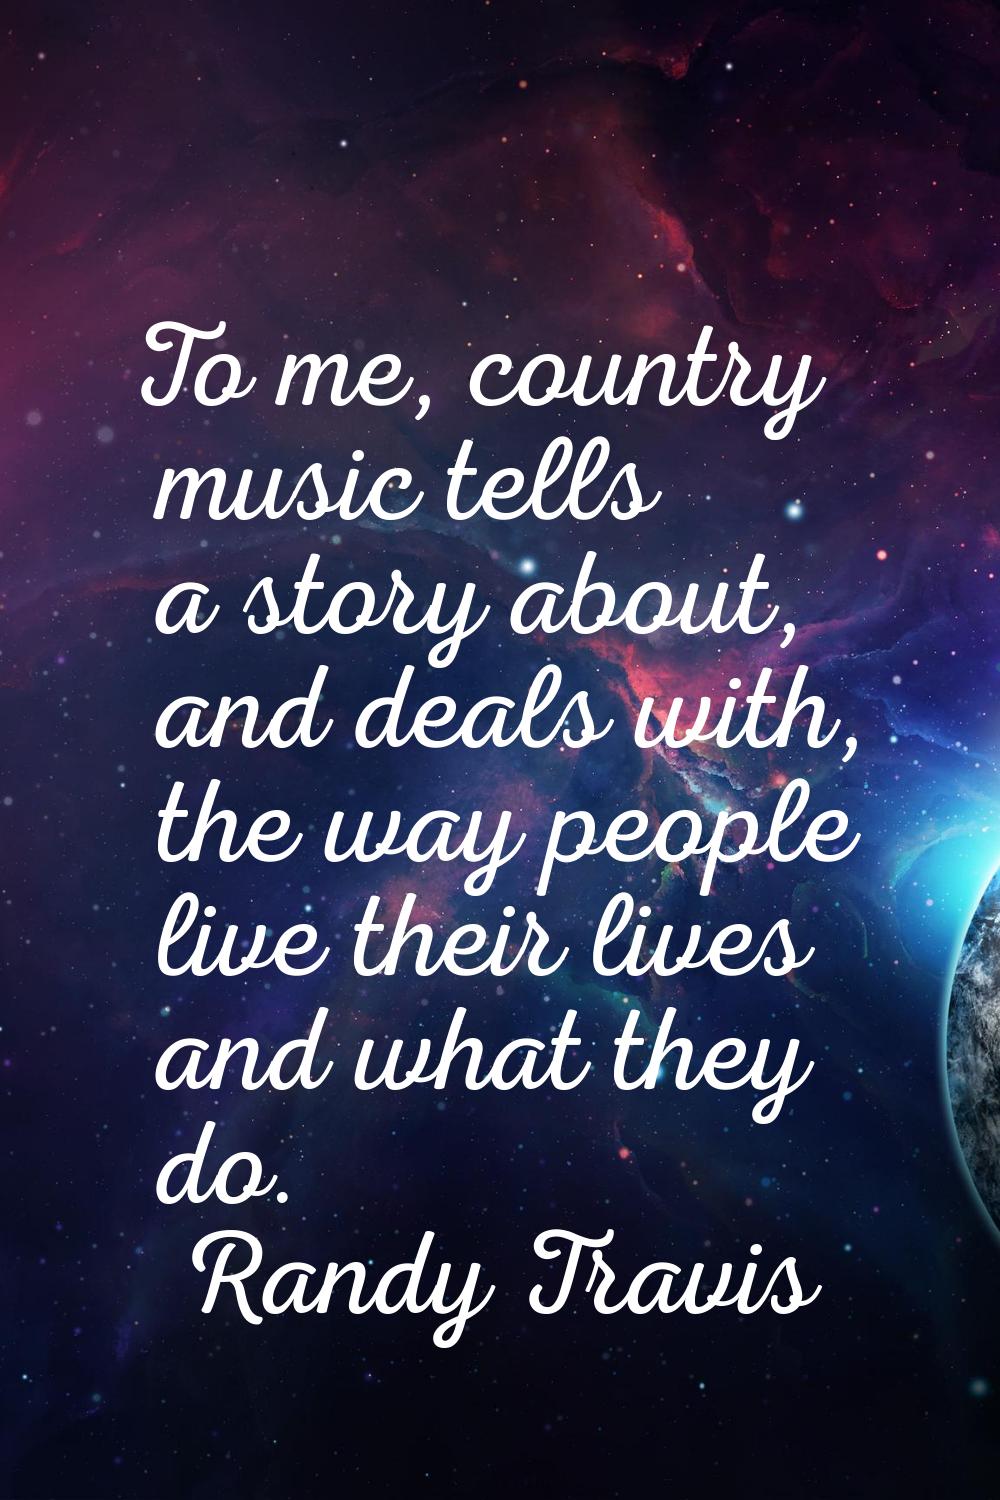 To me, country music tells a story about, and deals with, the way people live their lives and what 